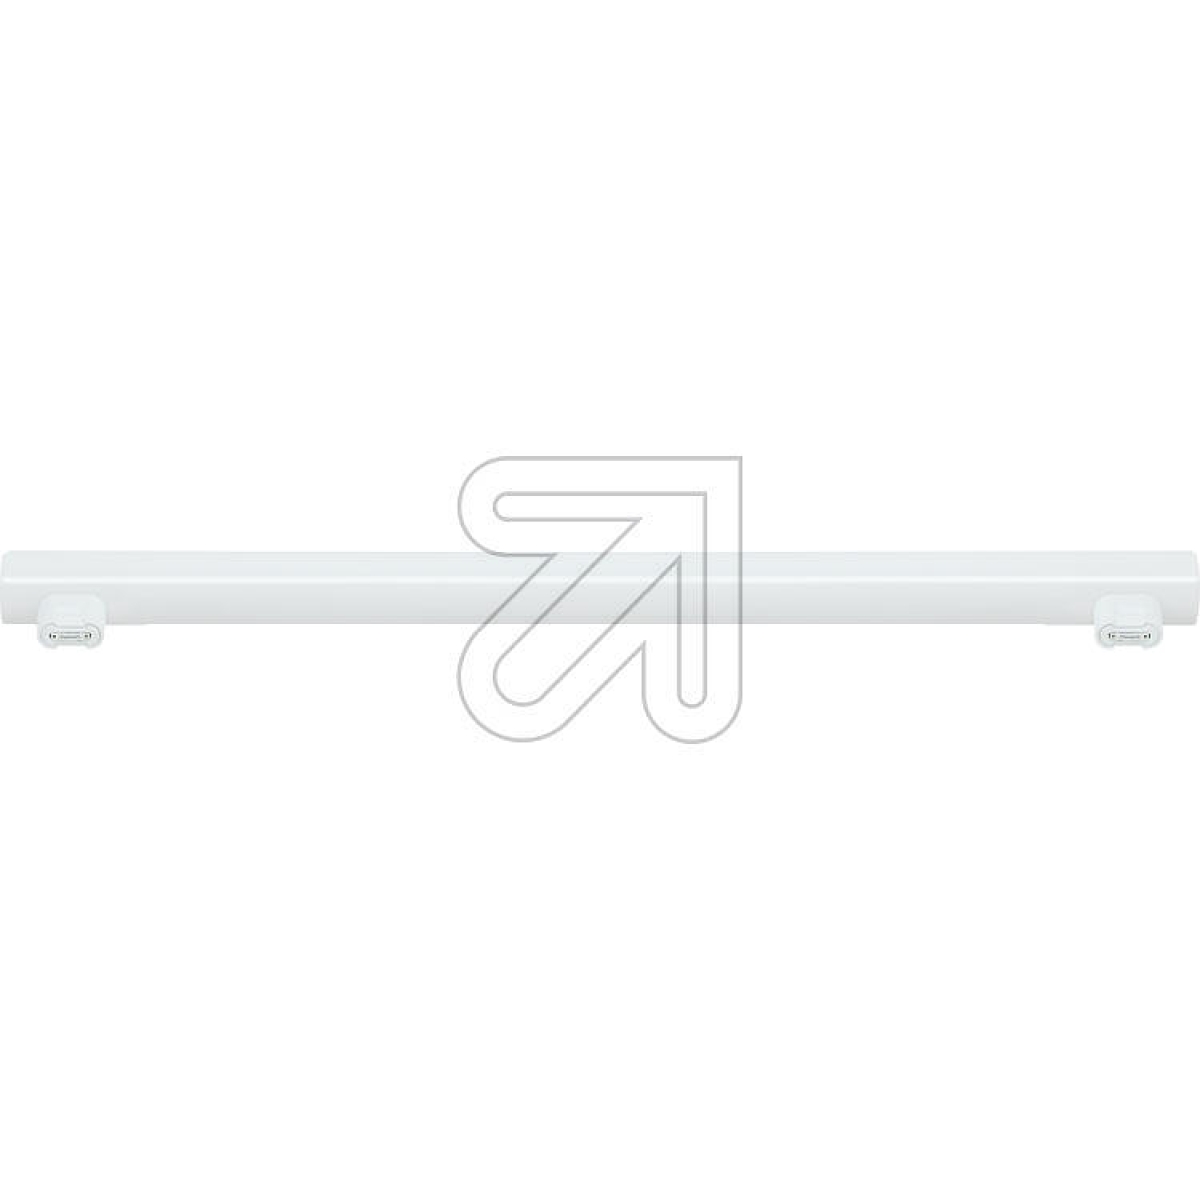 EGBLED line lamp S14s L500mm 7.5W 700lm 2700KArticle-No: 539970